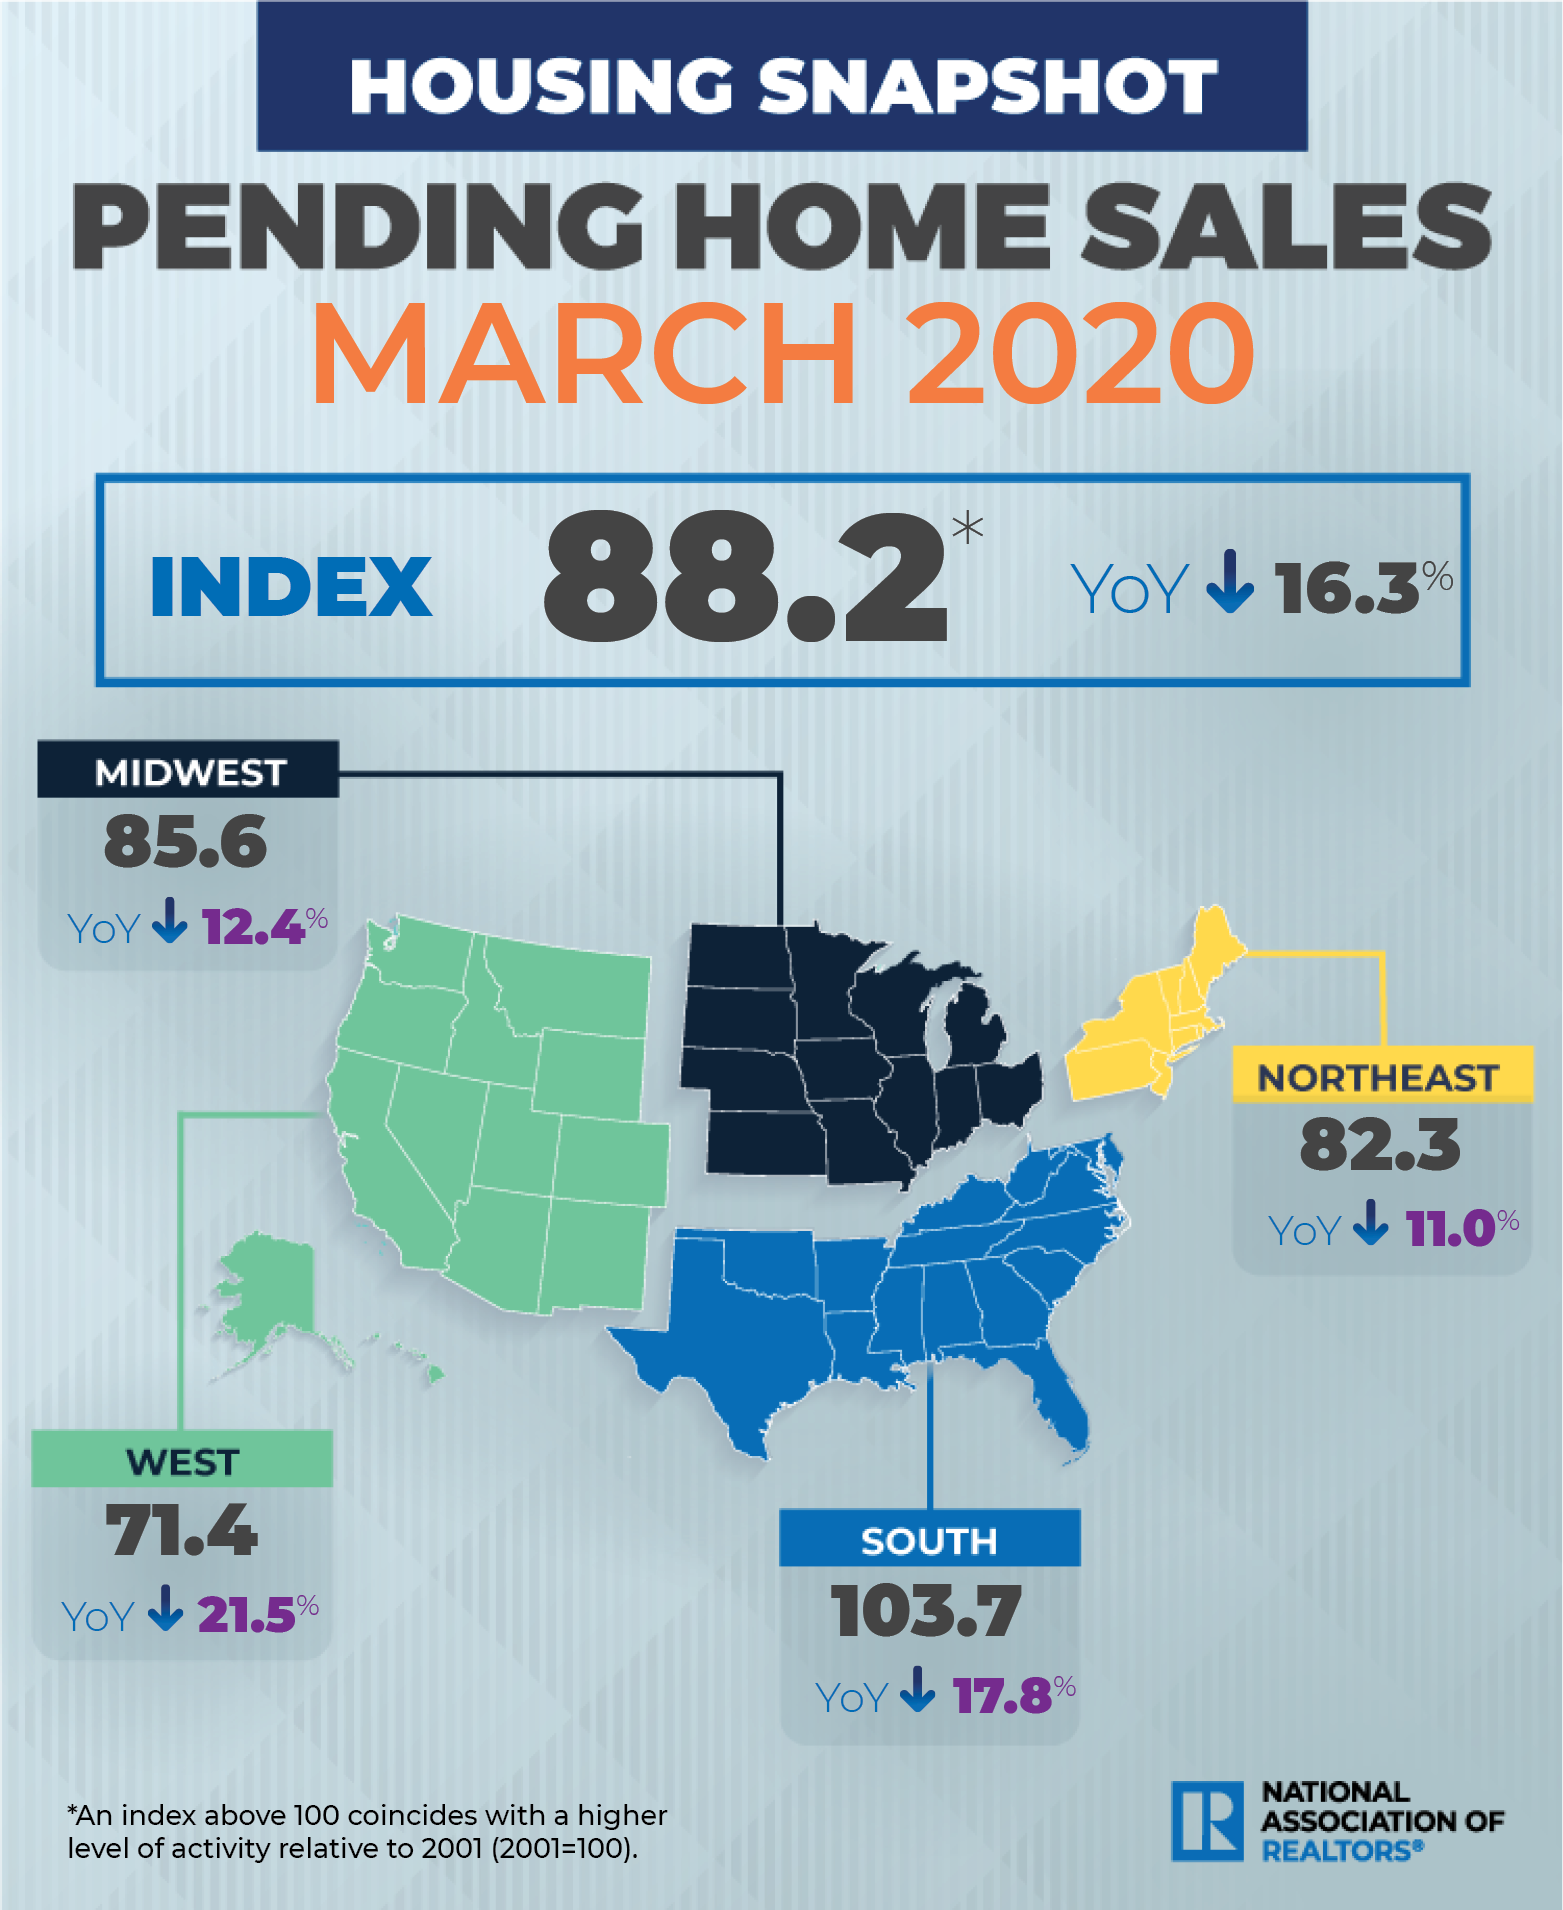 Pending home sales fell in March, seeing expected declines as a result of the Coronavirus outbreak, according to the National Association of Realtors